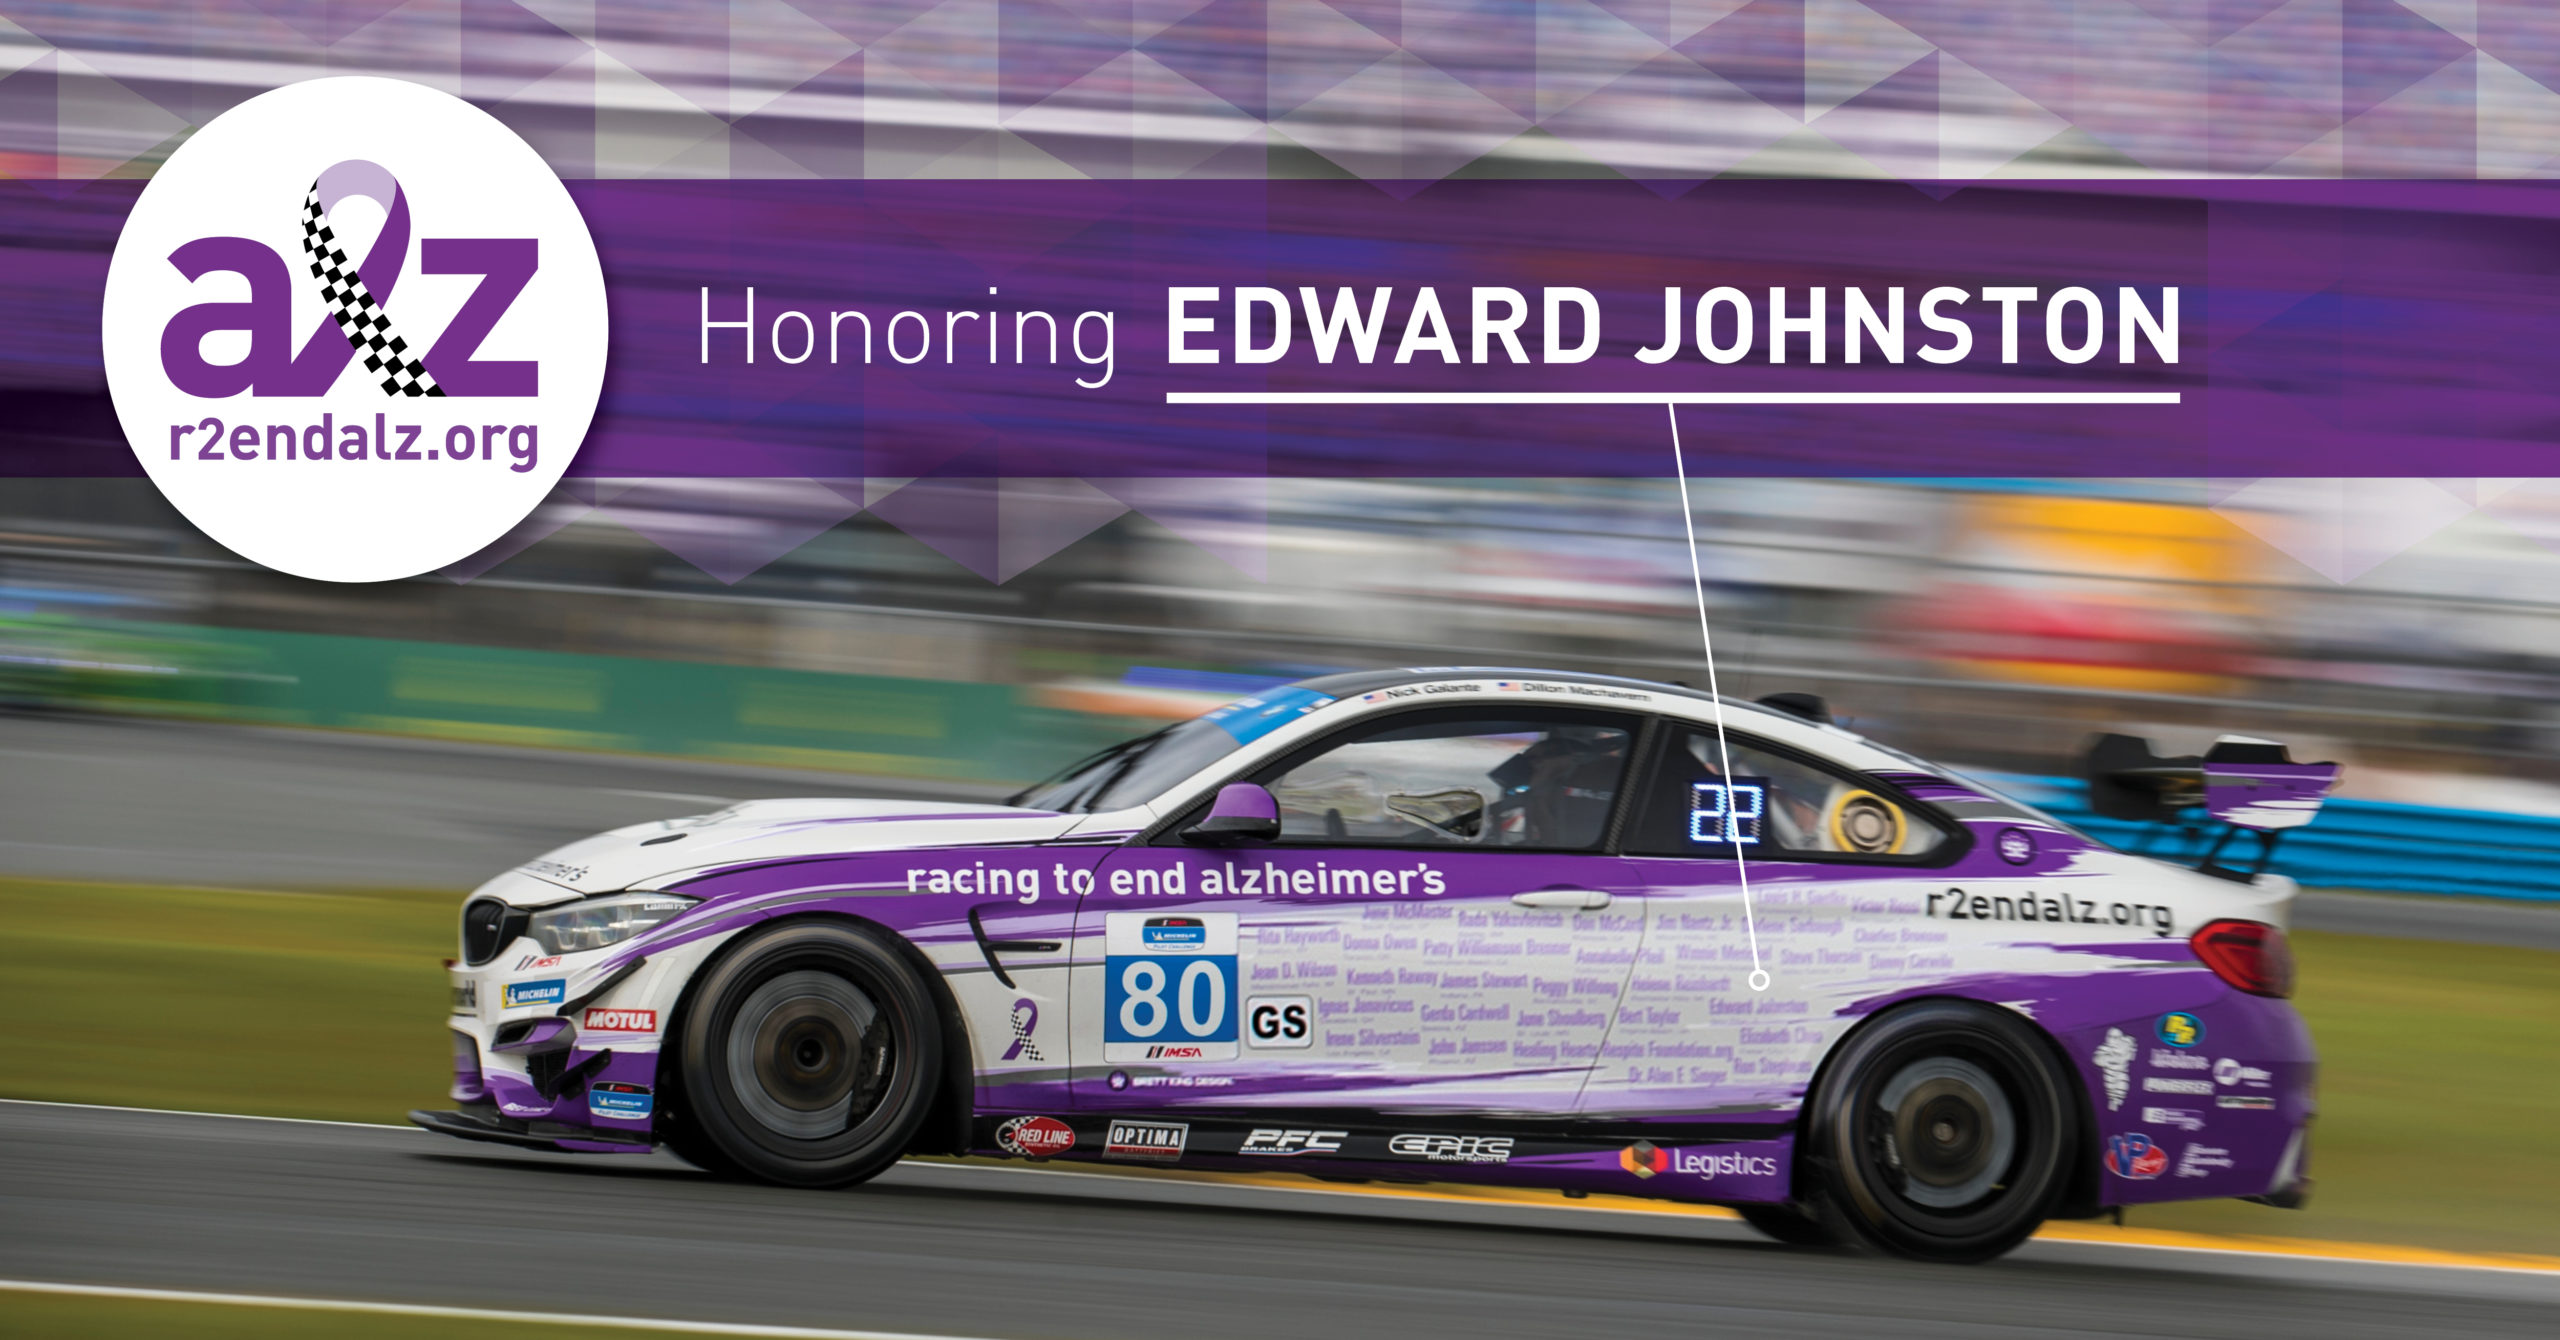 Edward Johnston is Racing to End Alzheimer's